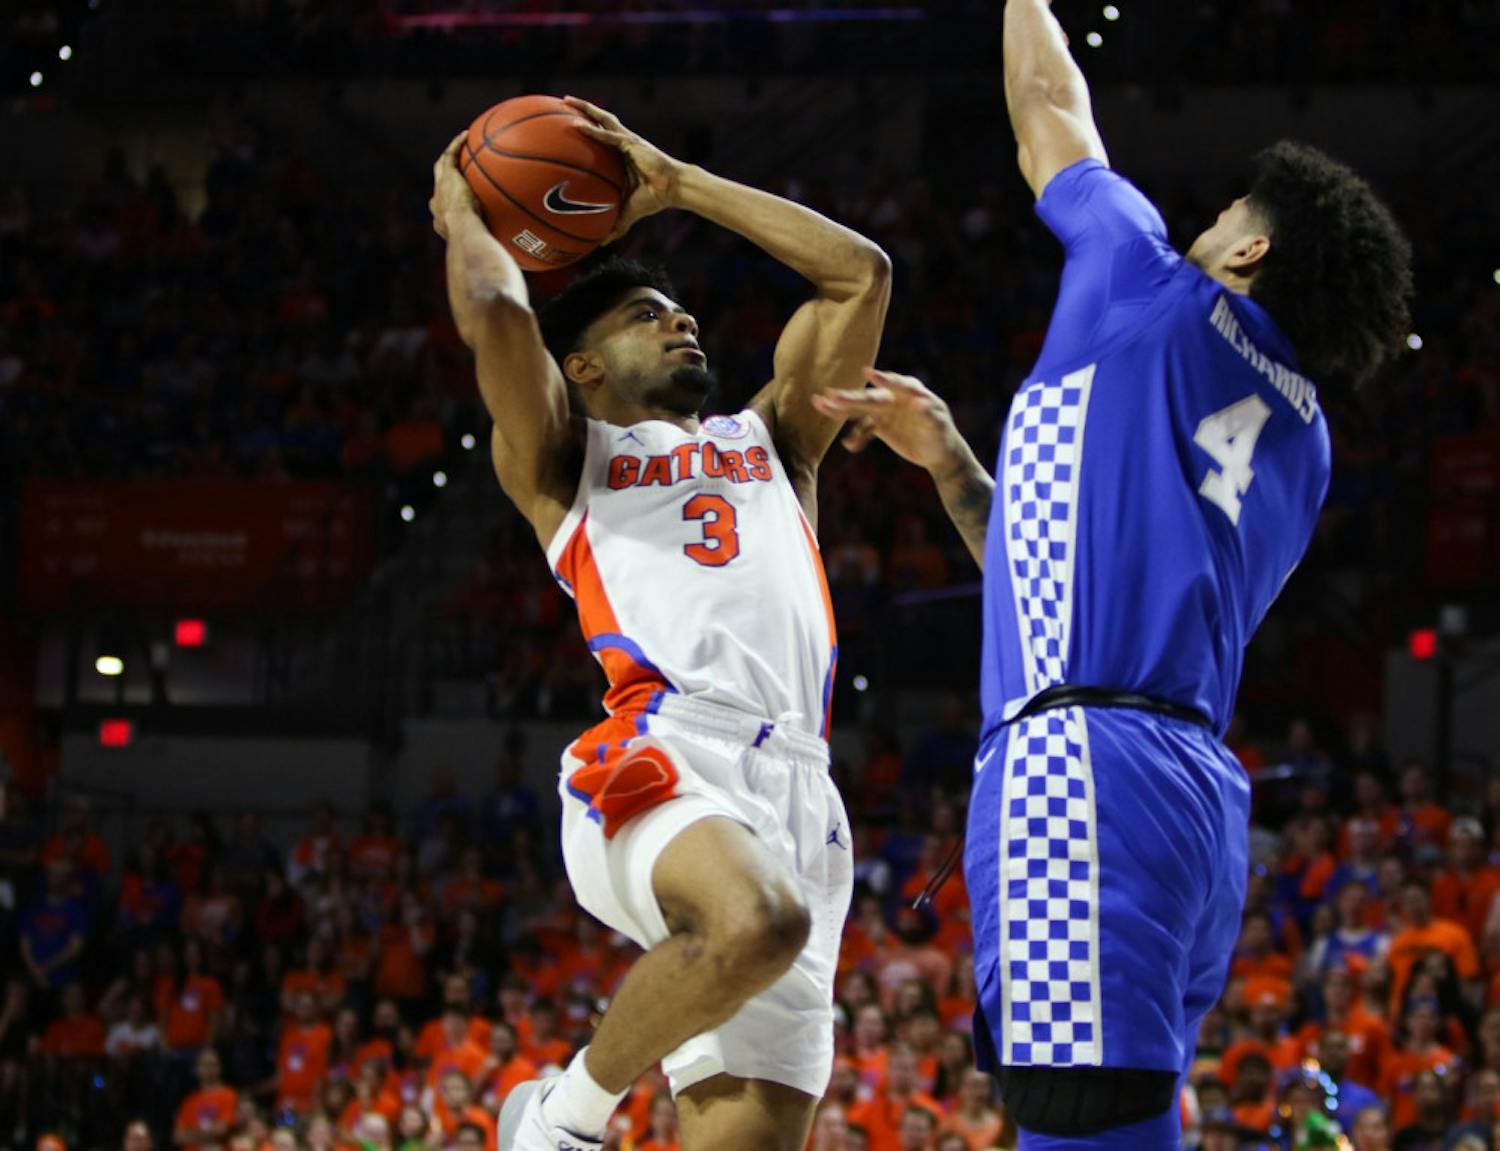 Senior guard Jalen Hudson's 11 points in the Gators' 65-54 loss to Kentucky were his highest total since Butler (Dec. 29) and the first time this year he'd reached double figures in SEC play.